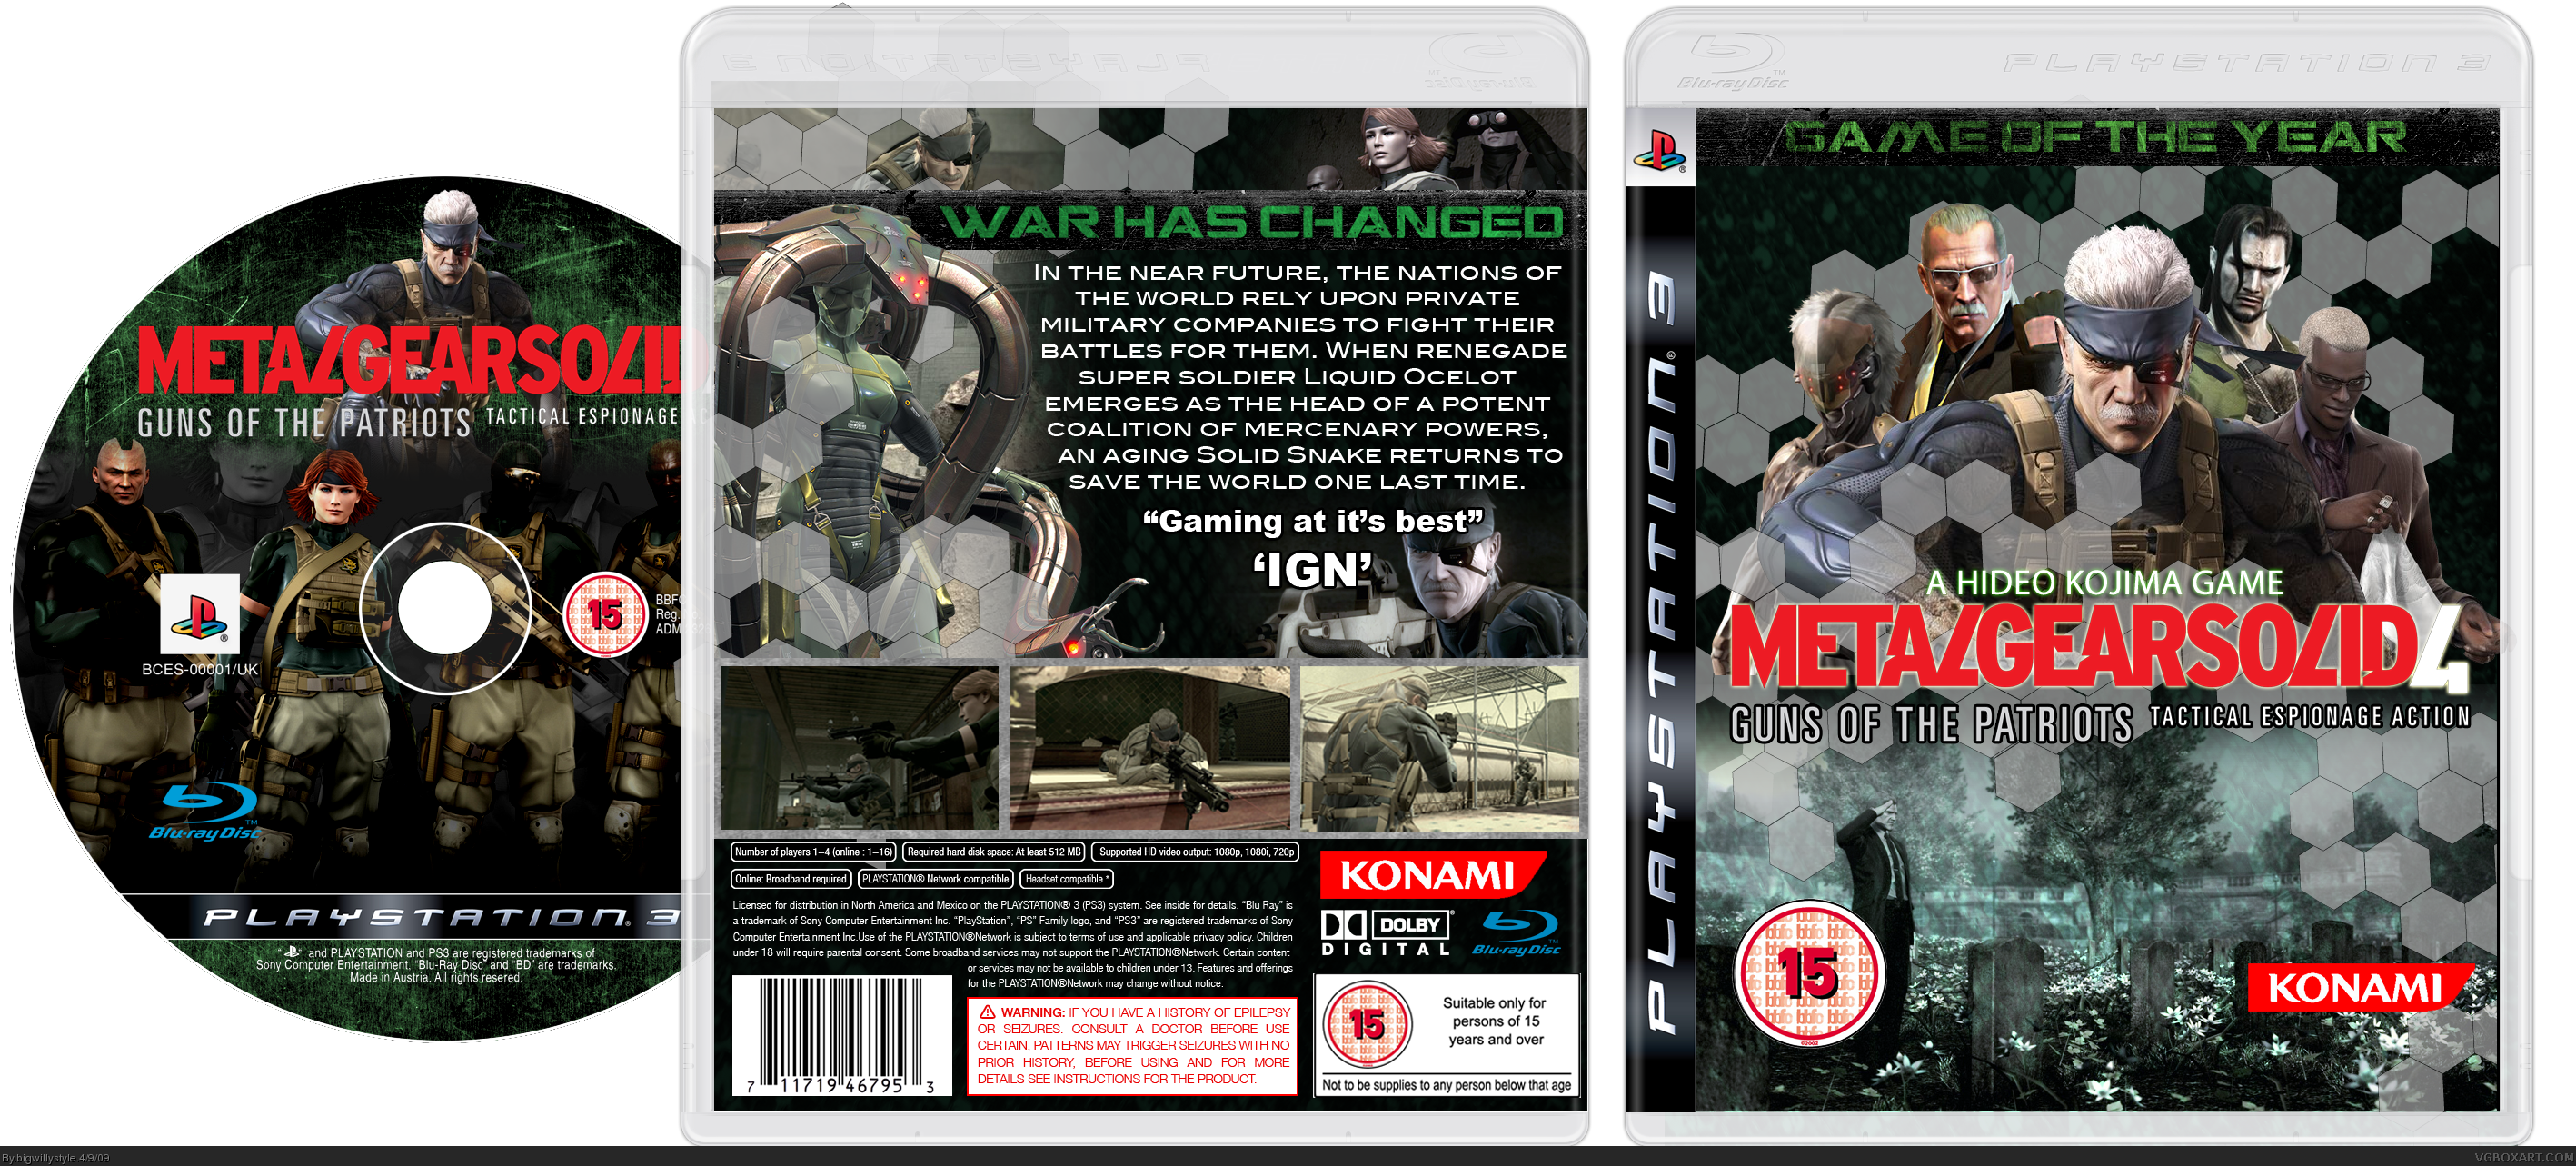 Metal Gear Solid 4: Game of the Year box cover